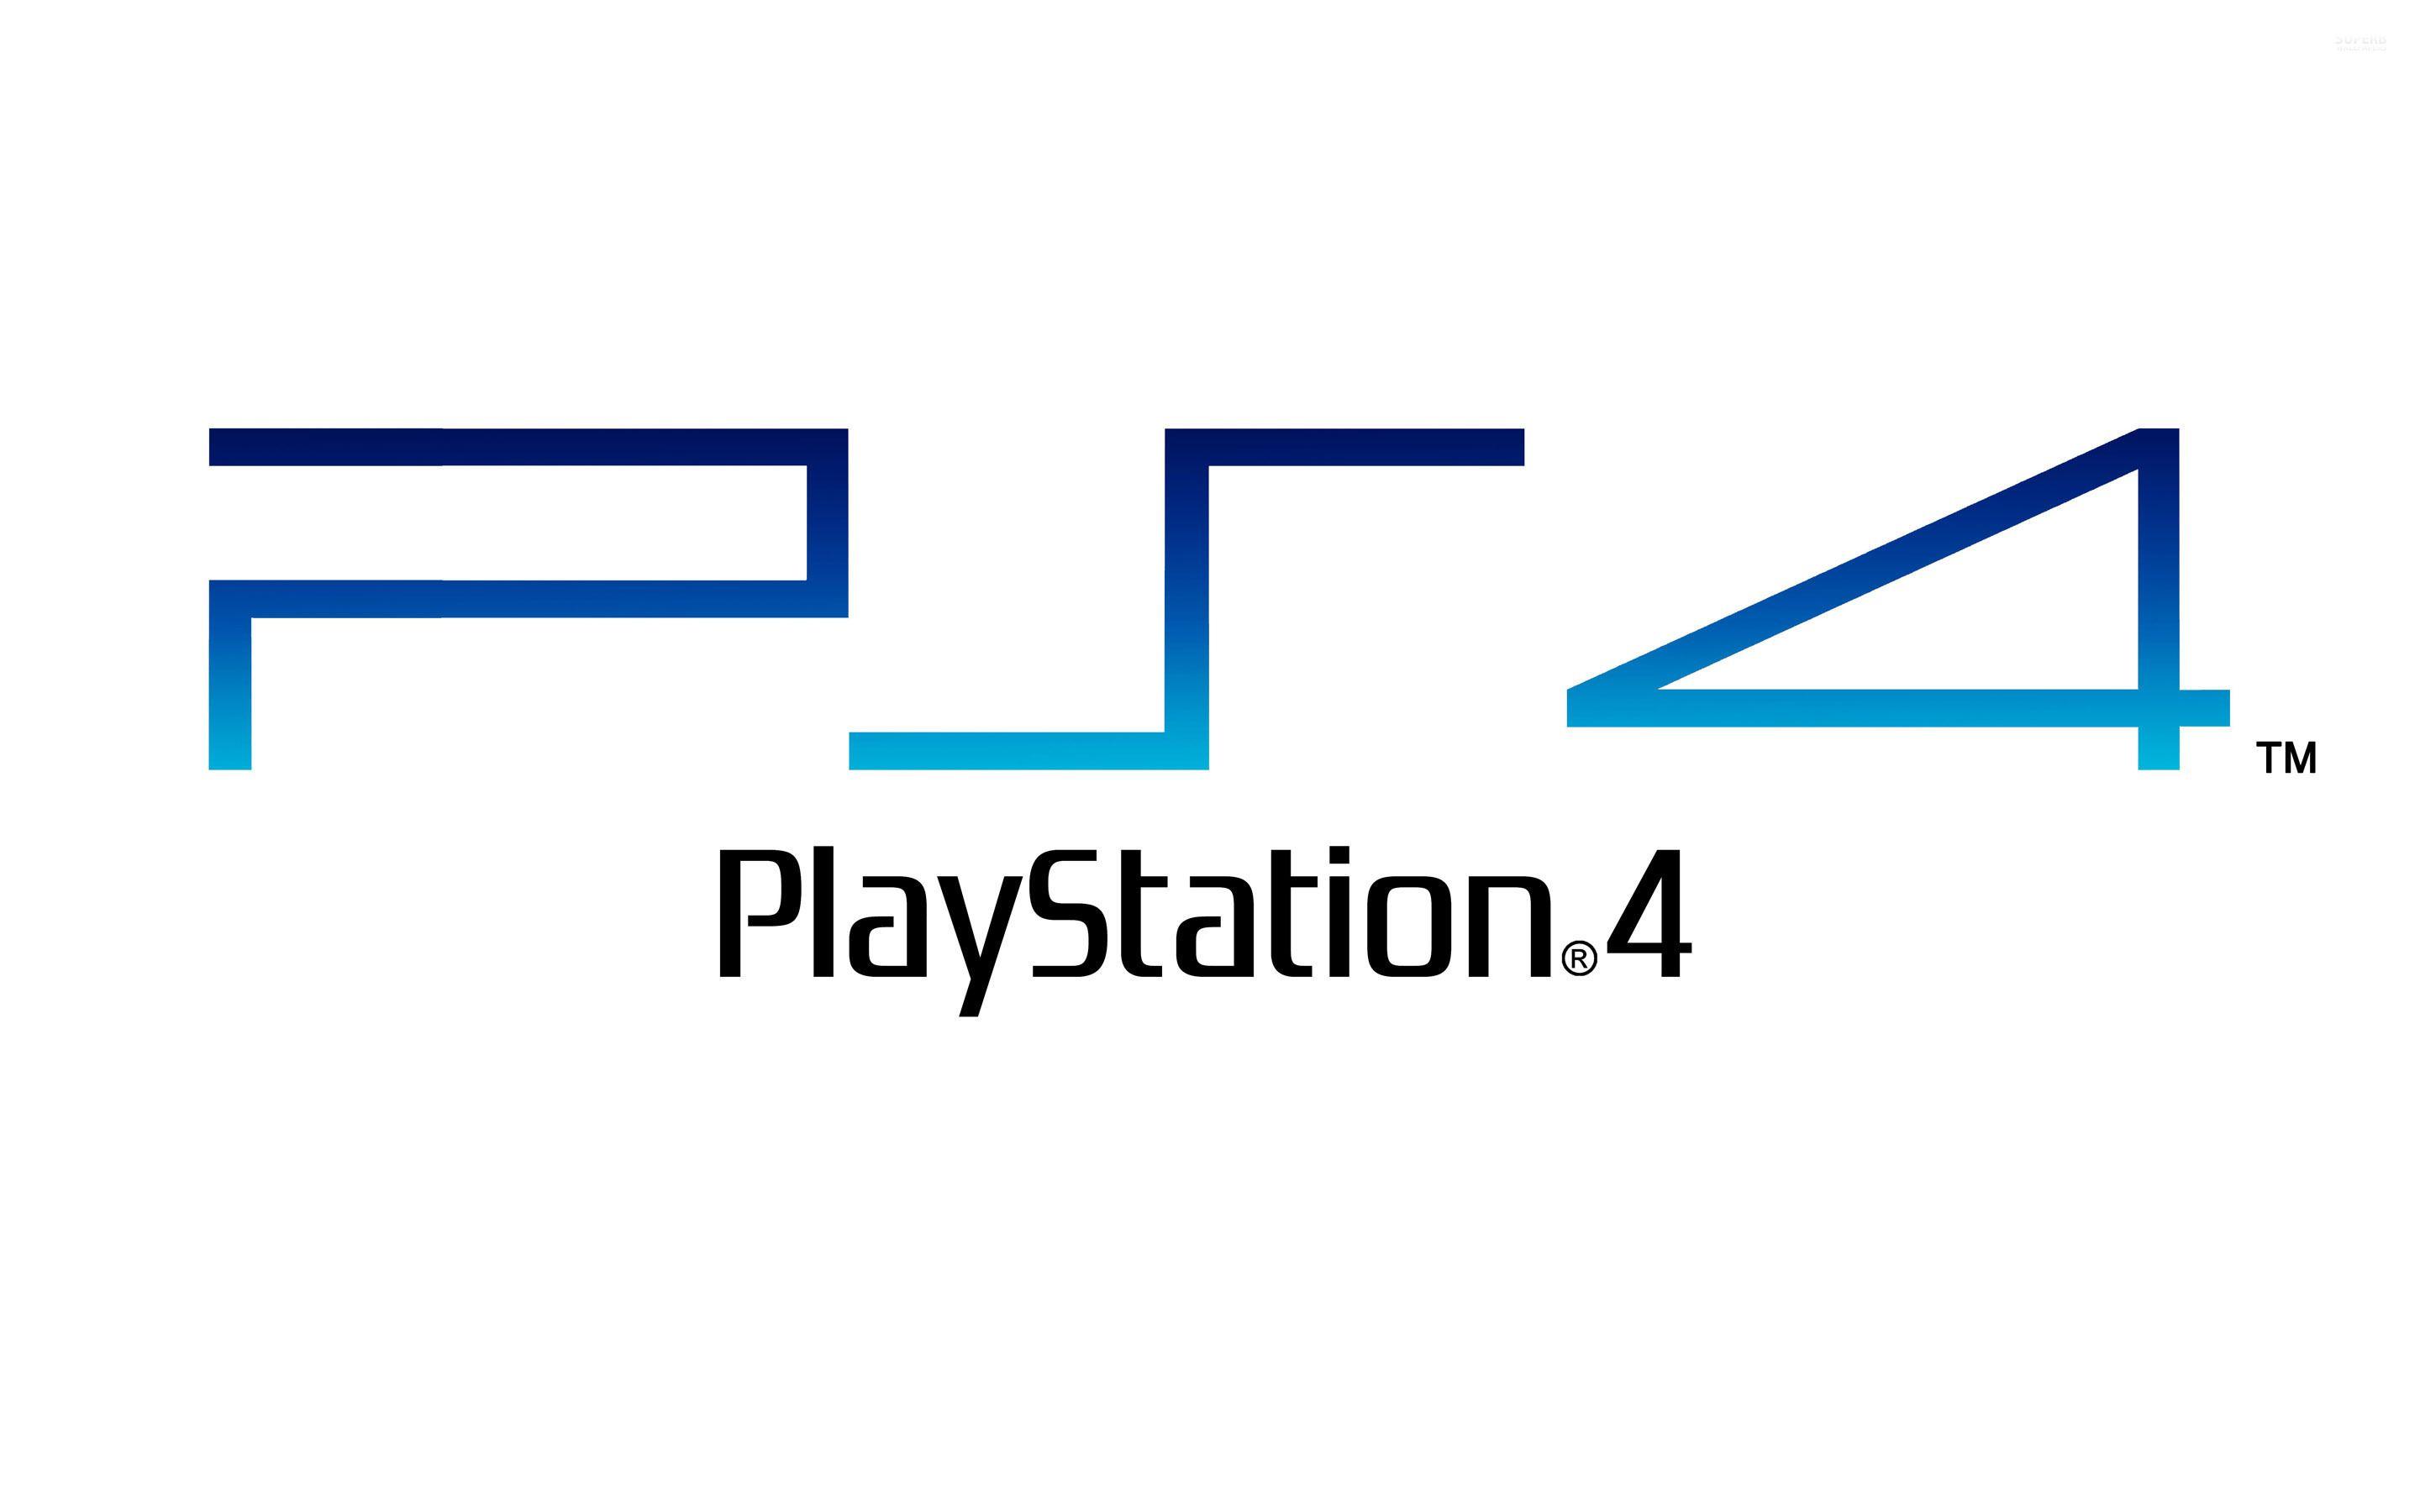 Sony PlayStation Logo - Sony PlayStation 4 Wallpaper, Picture, Image